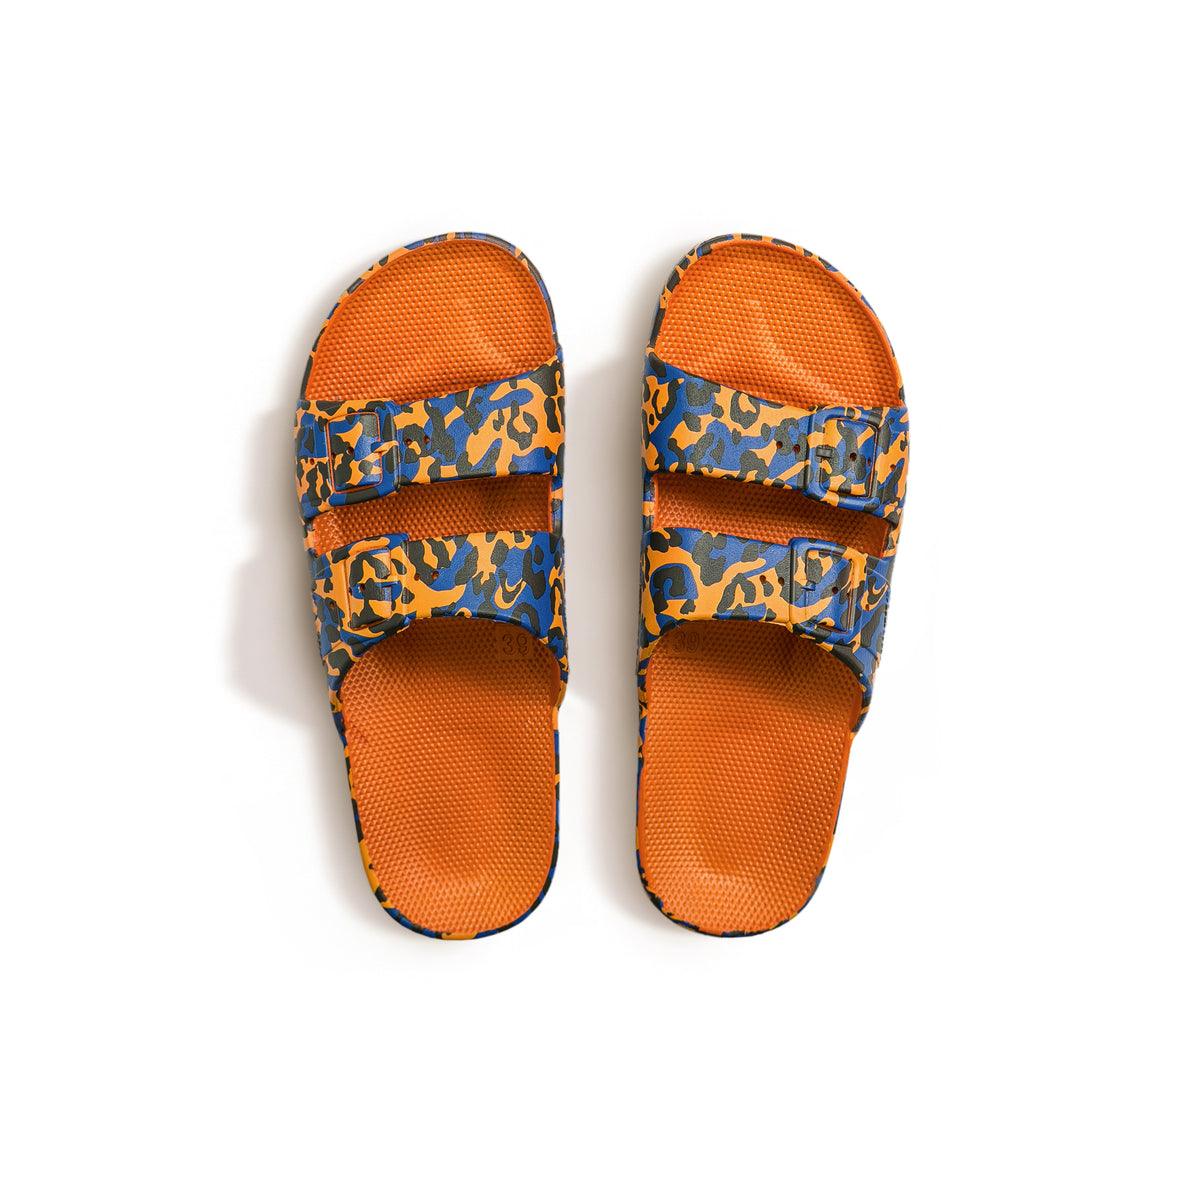 Parallel Culture Shoes and Fashion Online SLIDES FREEDOM MOSES FREEDOM MOSES PRINTS